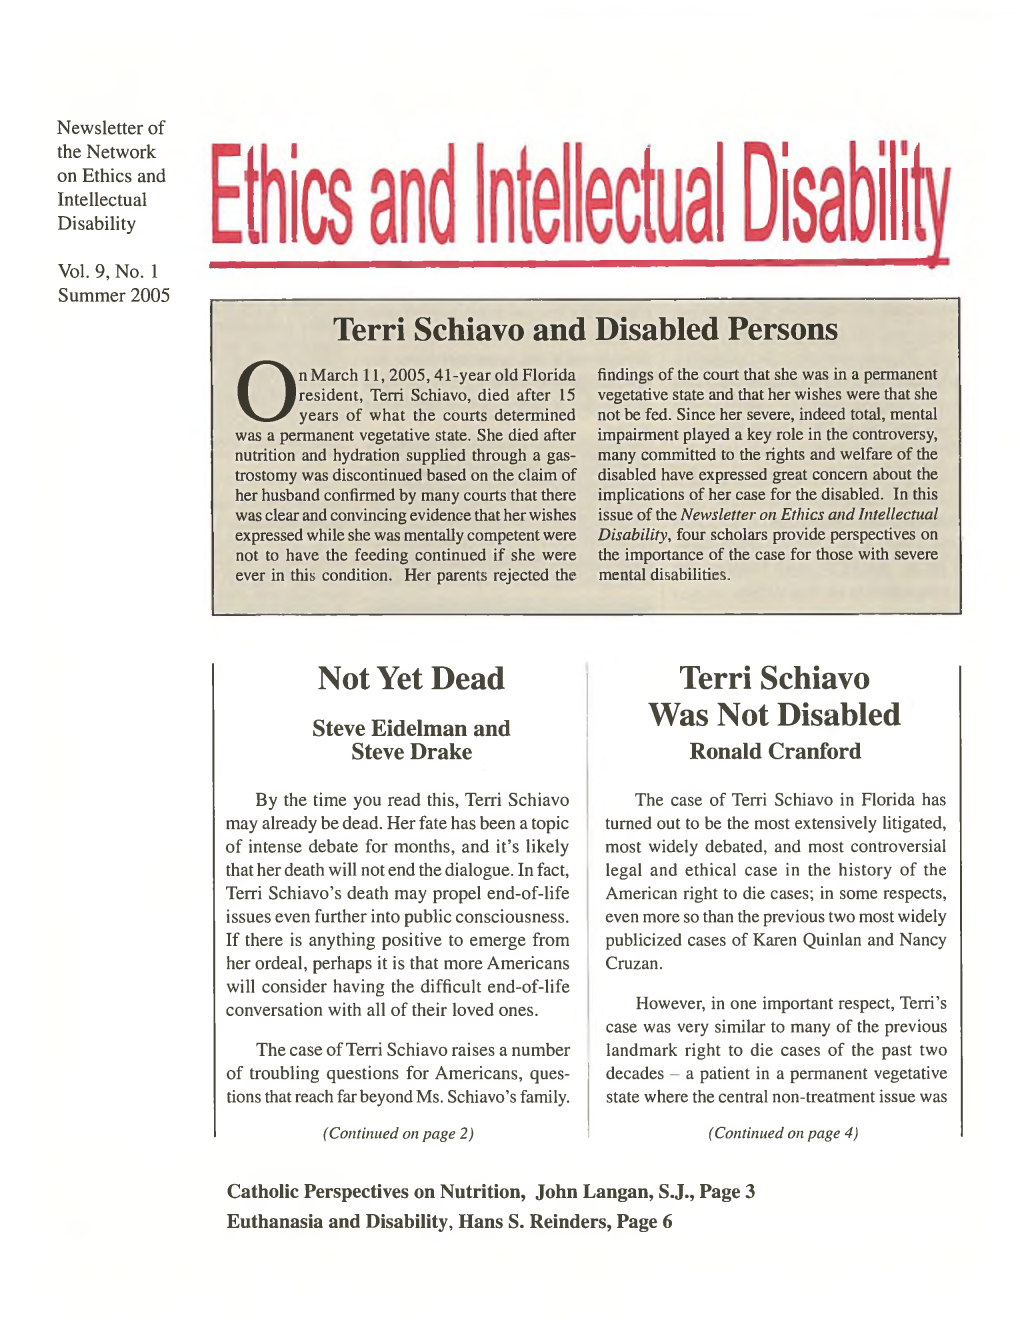 Terri Schiavo and Disabled Persons